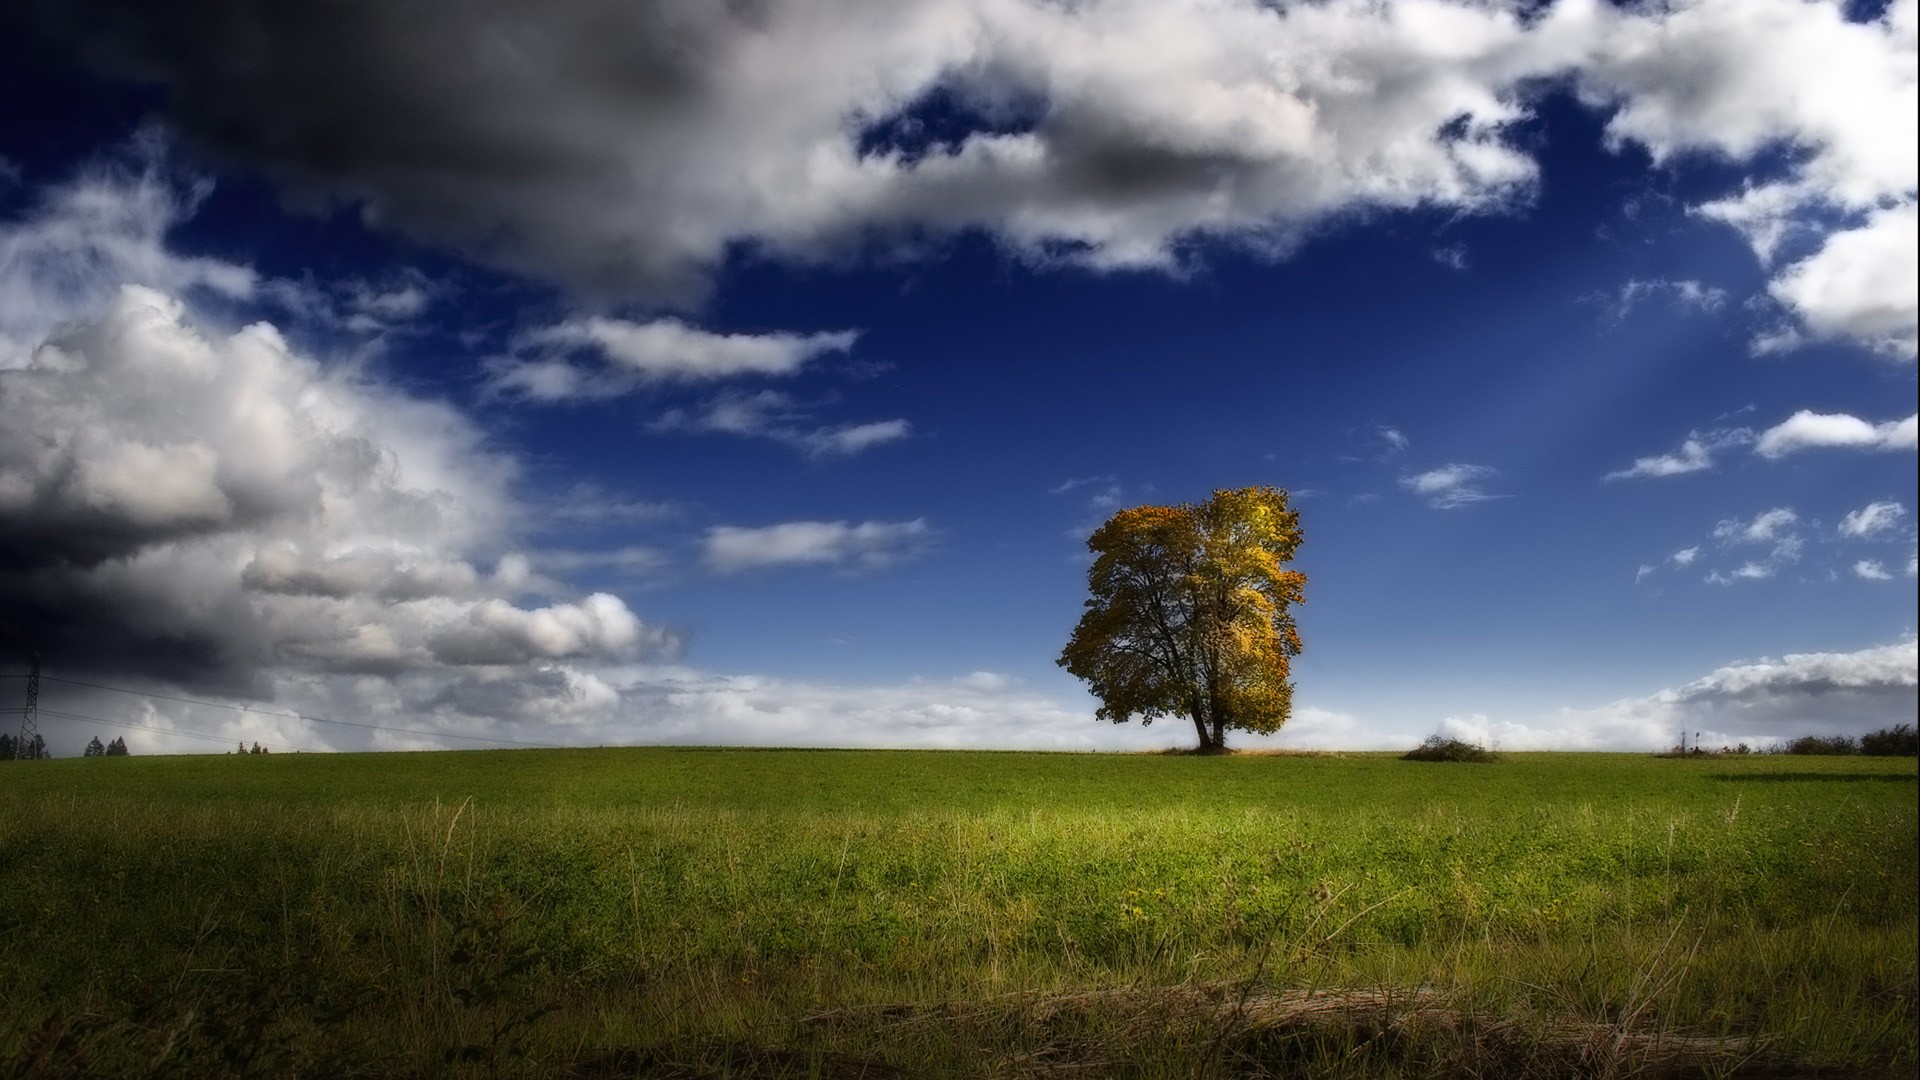 General 1920x1080 landscape nature trees grass clouds sky outdoors